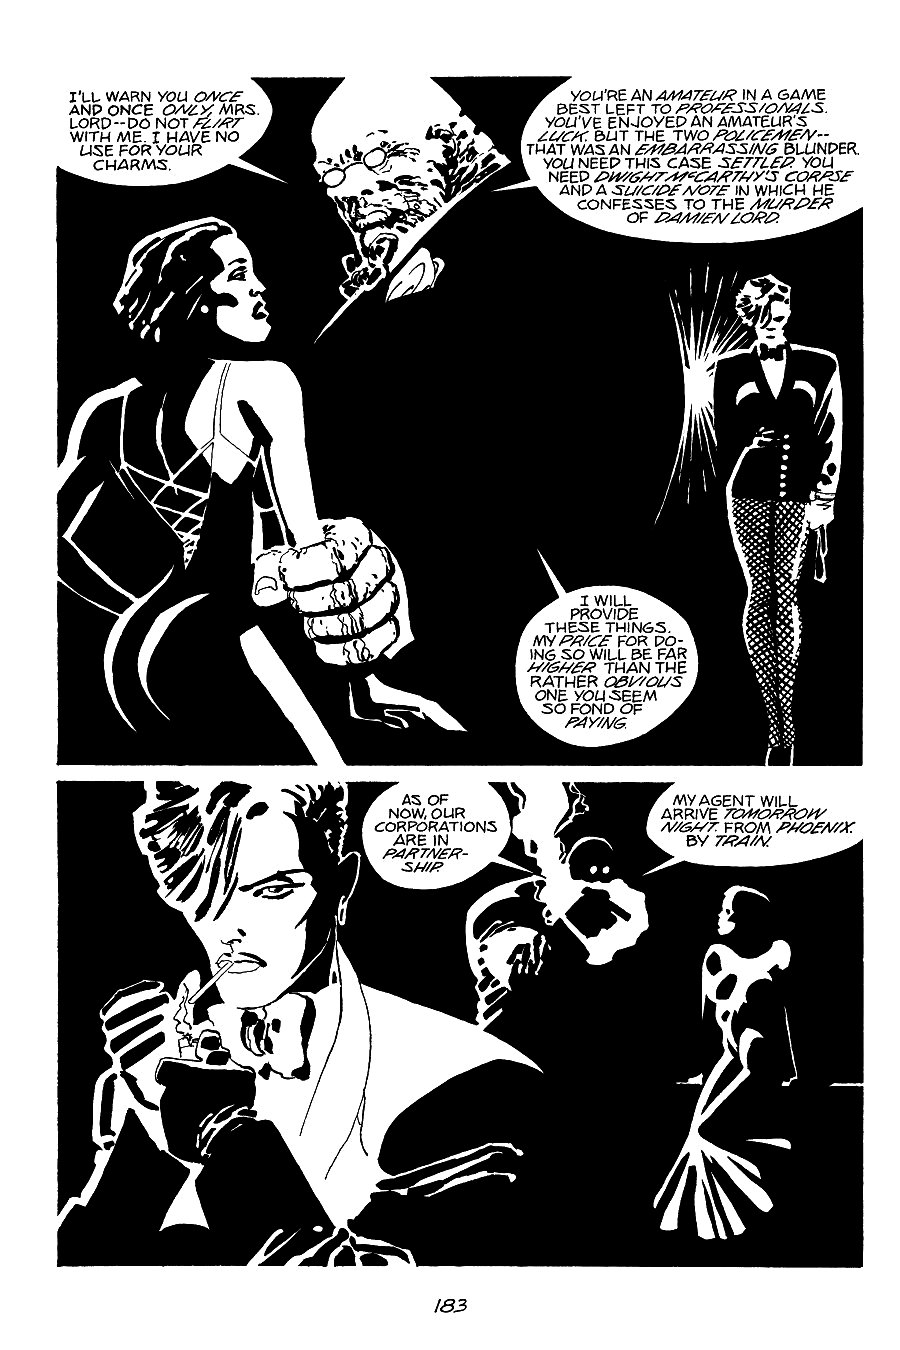 page 183 of sin city 2 the hard goodbye